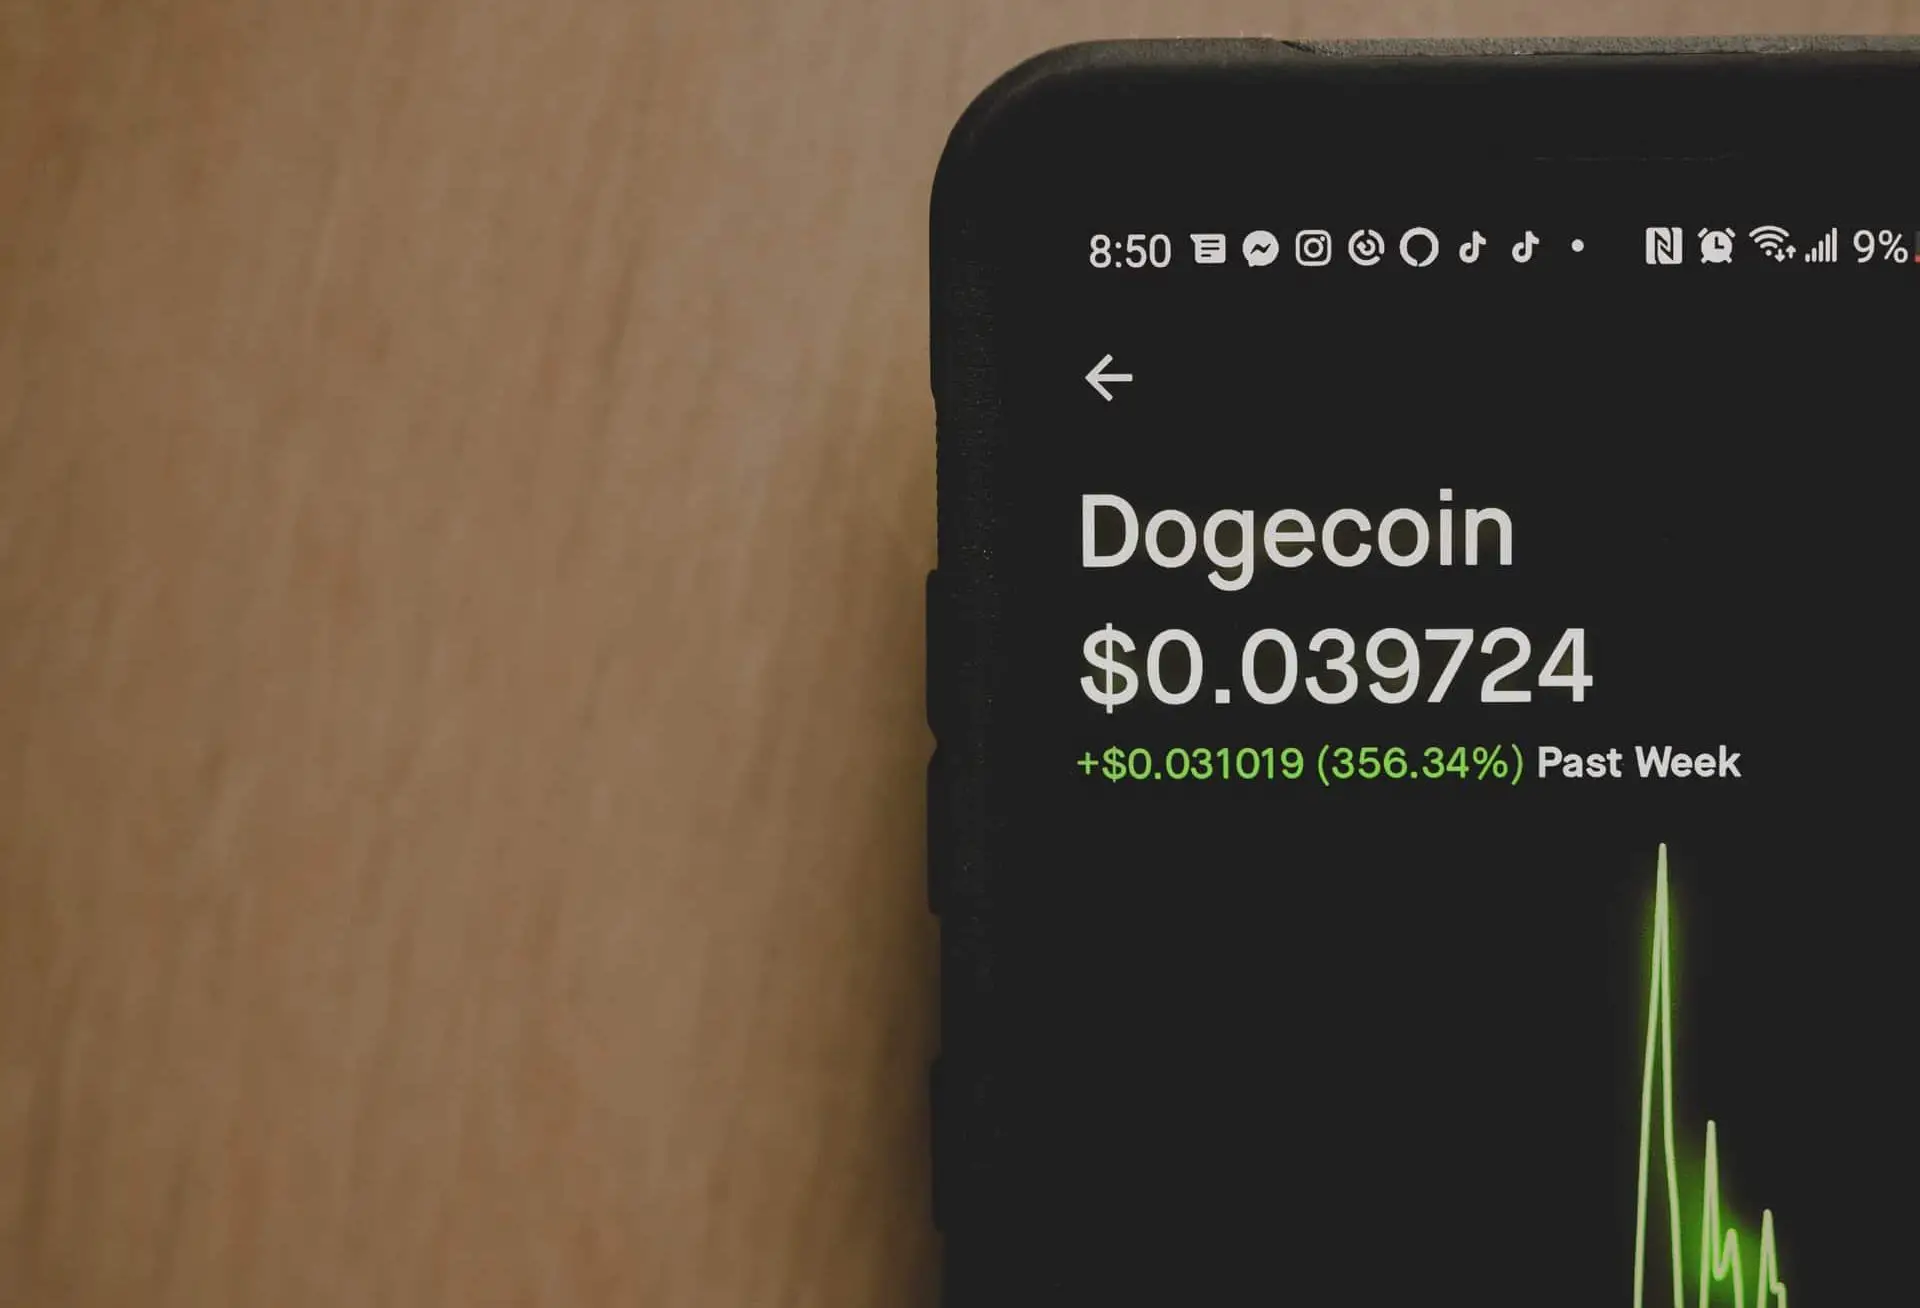 How Can I Buy Dogecoin With TD Ameritrade?